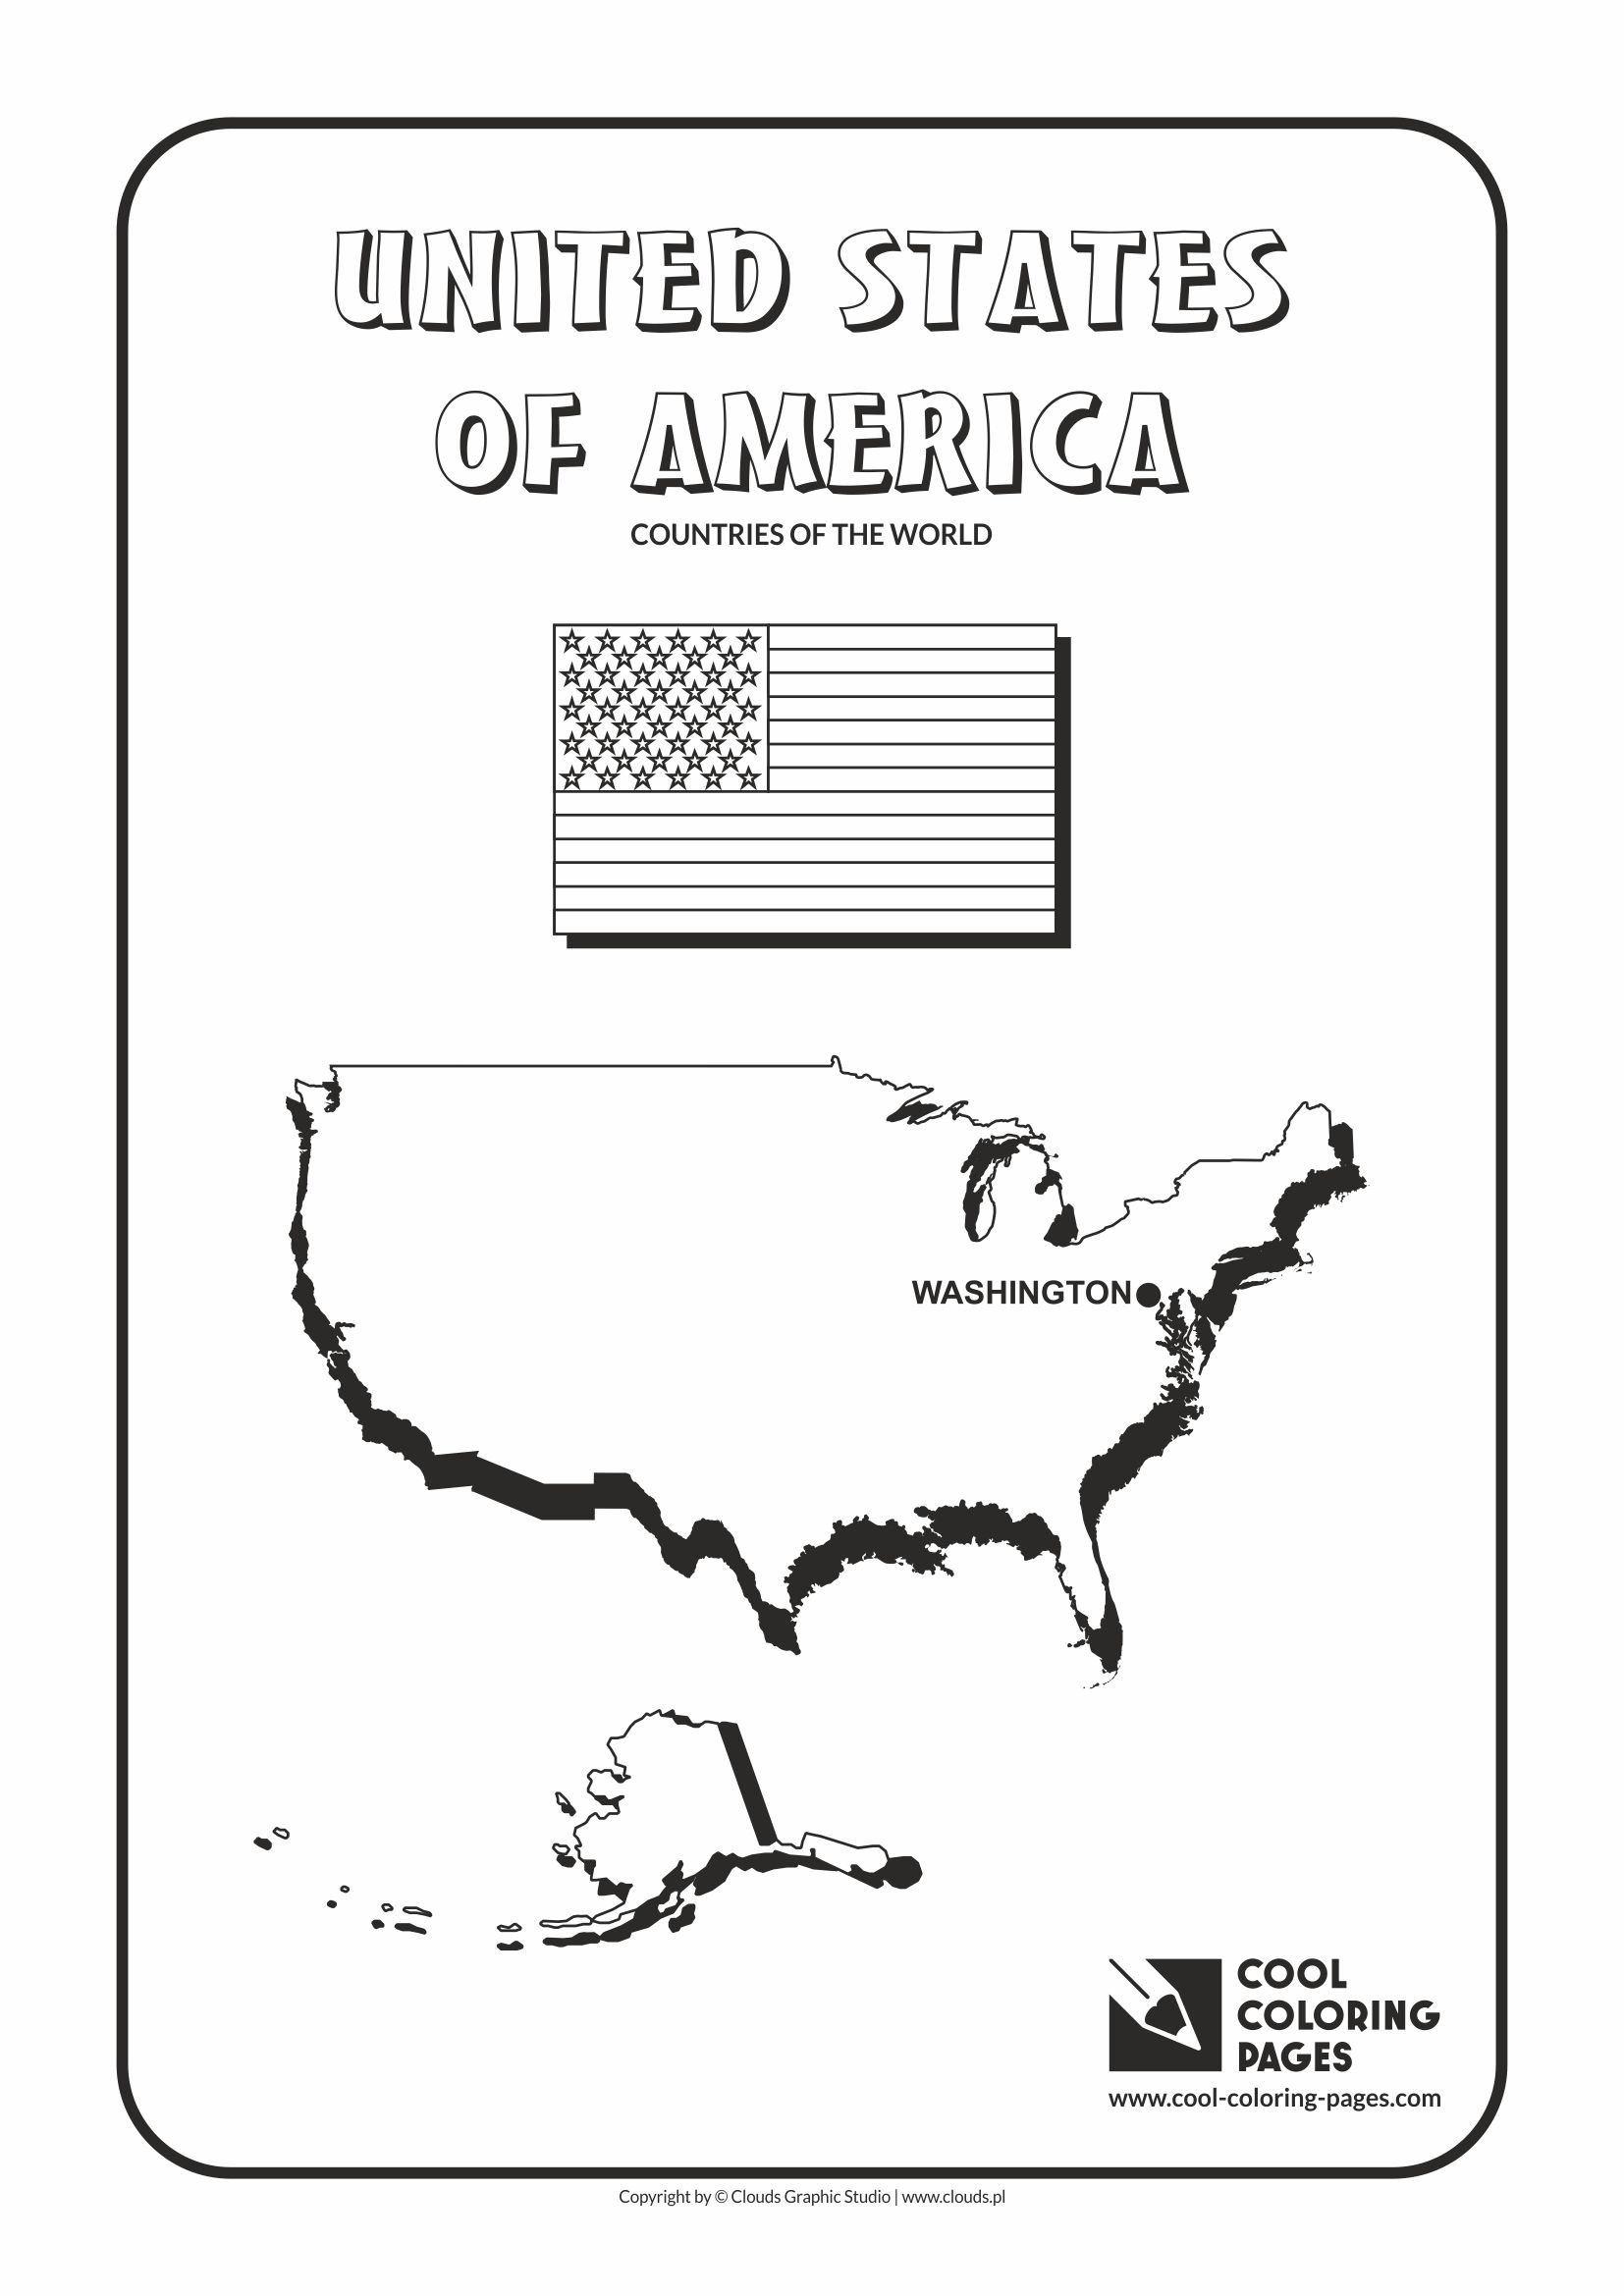 Cool Coloring Pages - Countries of the world / USA